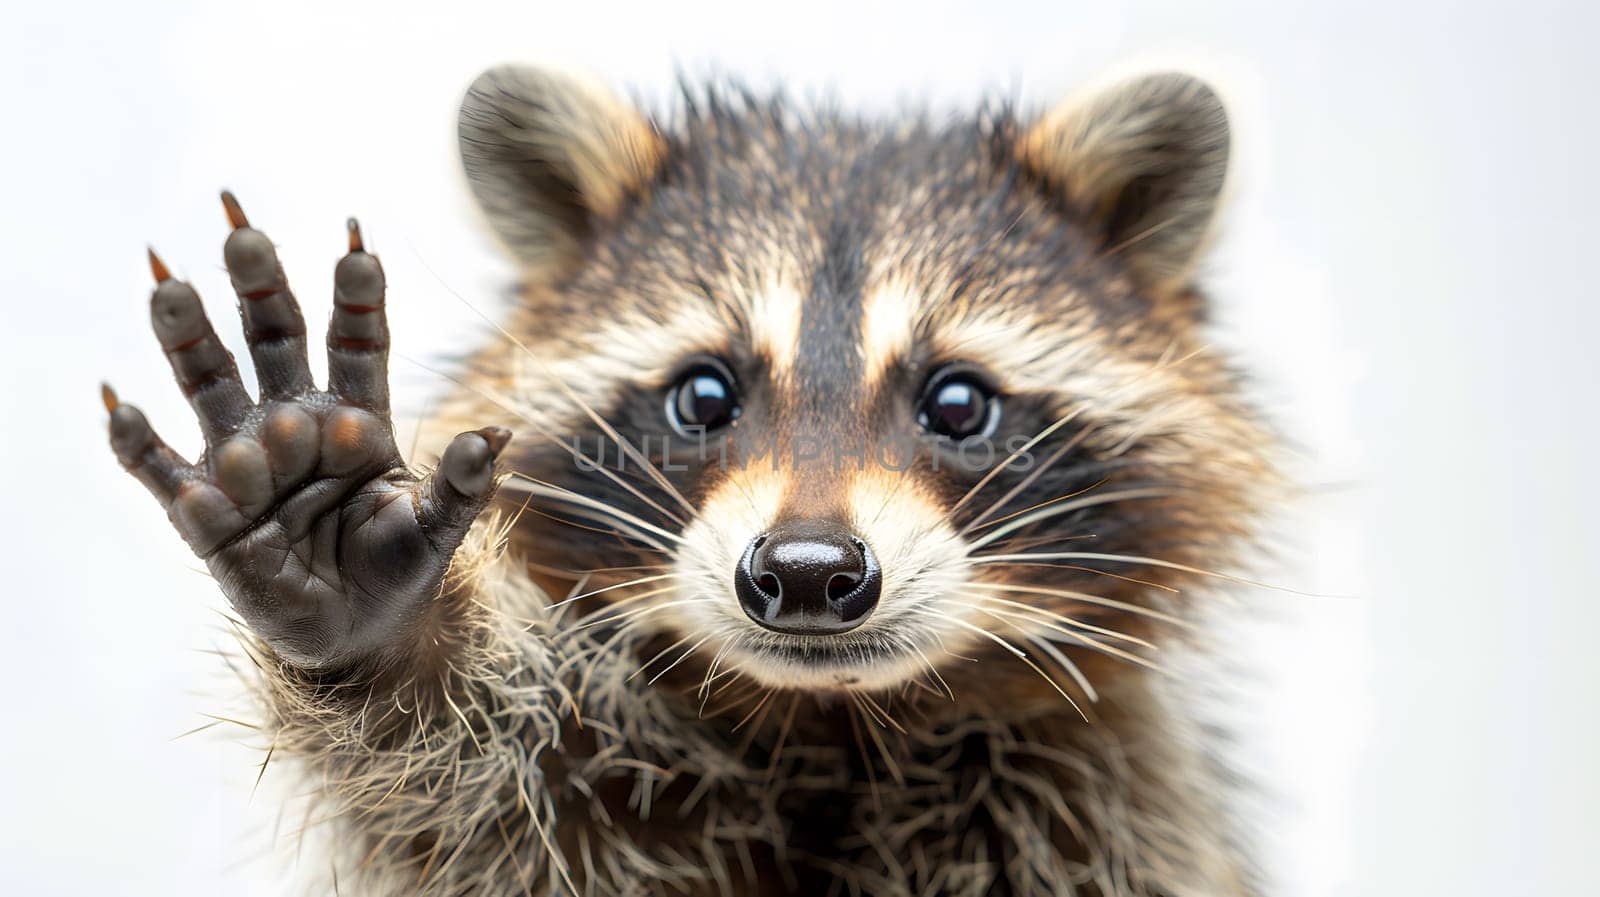 A terrestrial animal, the raccoon, with whiskers and fur, is waving its clawed paw at the camera. A member of the Mustelidae family, this carnivore showcases its snout in this wildlife encounter